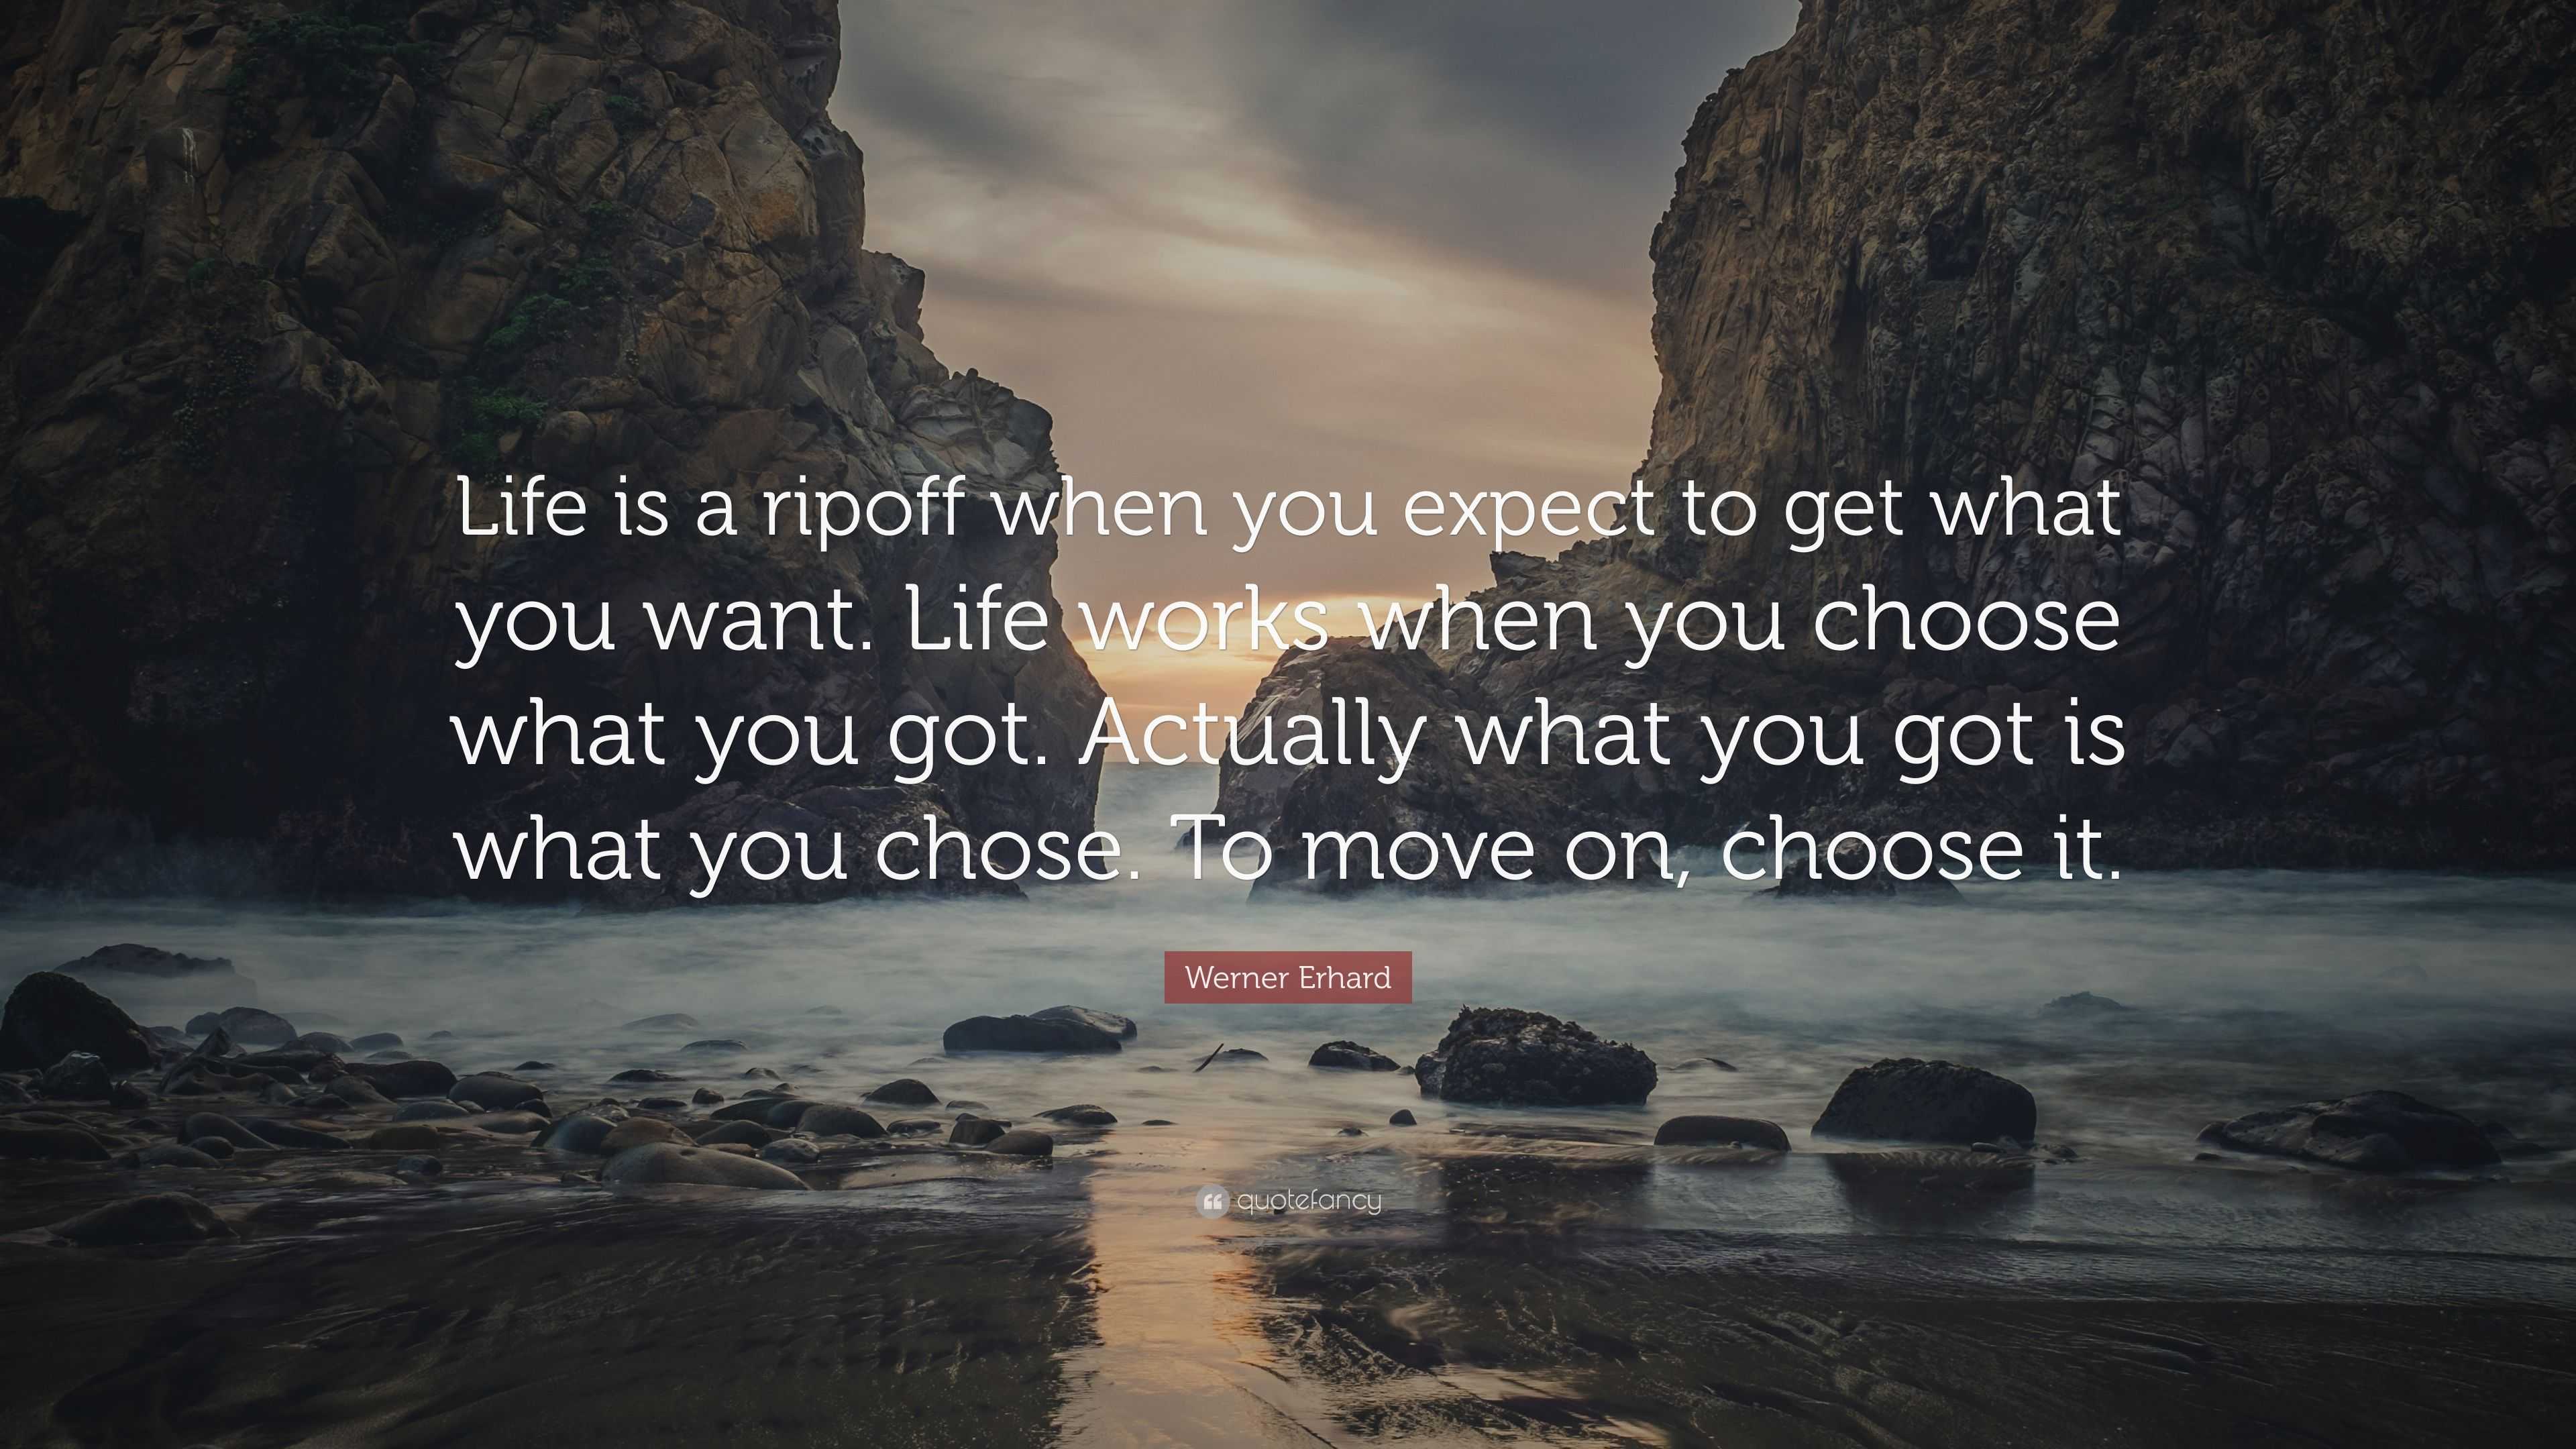 Werner Erhard Quote: “Life is a ripoff when you expect to get what you ...